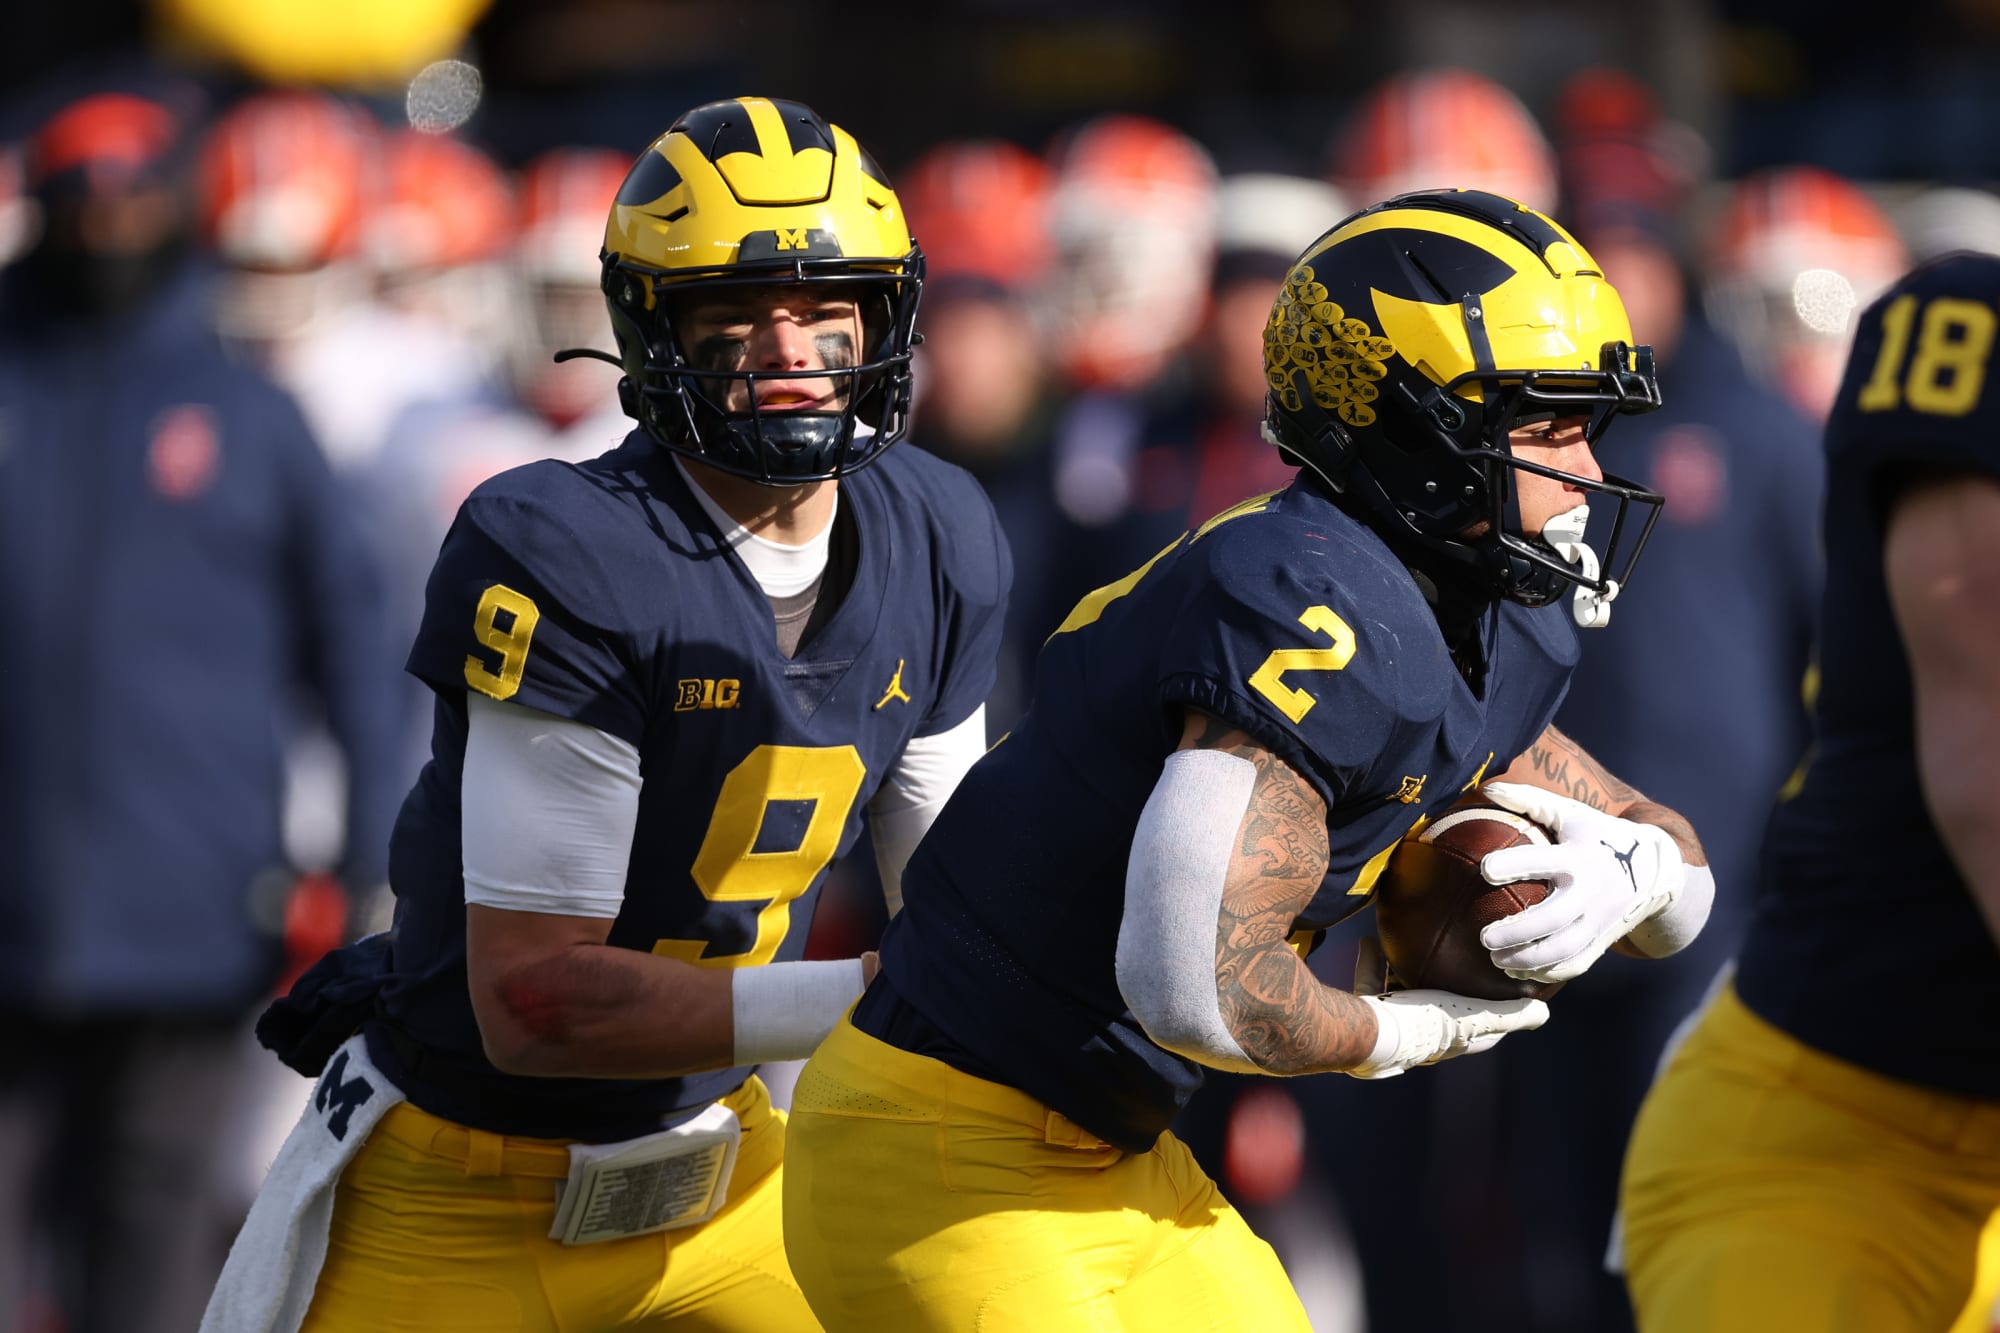 3 Michigan stars who won’t return in 2023 and 3 who will